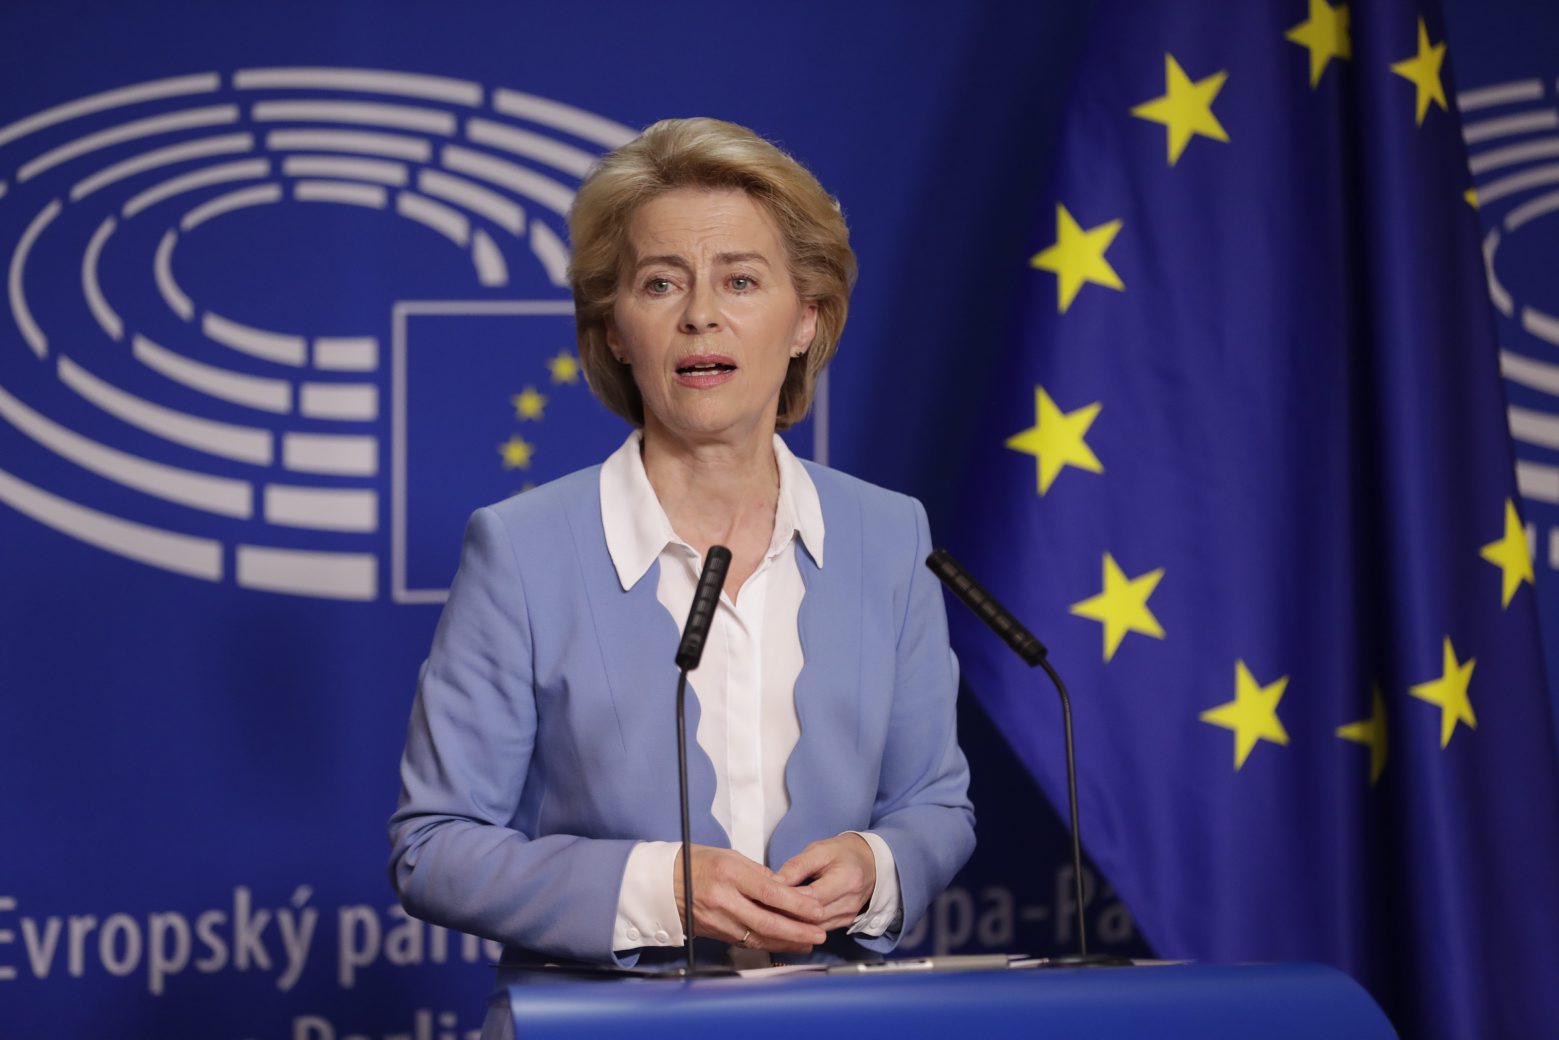 epa07708010 Ursula von der Leyen the nominated President of the European Commission gives a press briefing following a meeting of Political groups Presidents at European Parliament in Brussels, Belgium, 10 July 2019. Von der Leyen is meeting alll groups about her  nomination as the head of the European Commission, a vote will take place next week at plenary session of the parliament.  EPA/OLIVIER HOSLET BELGIUM EU FUTUR EU INTITUTIONS PRESIDENTS MEETING